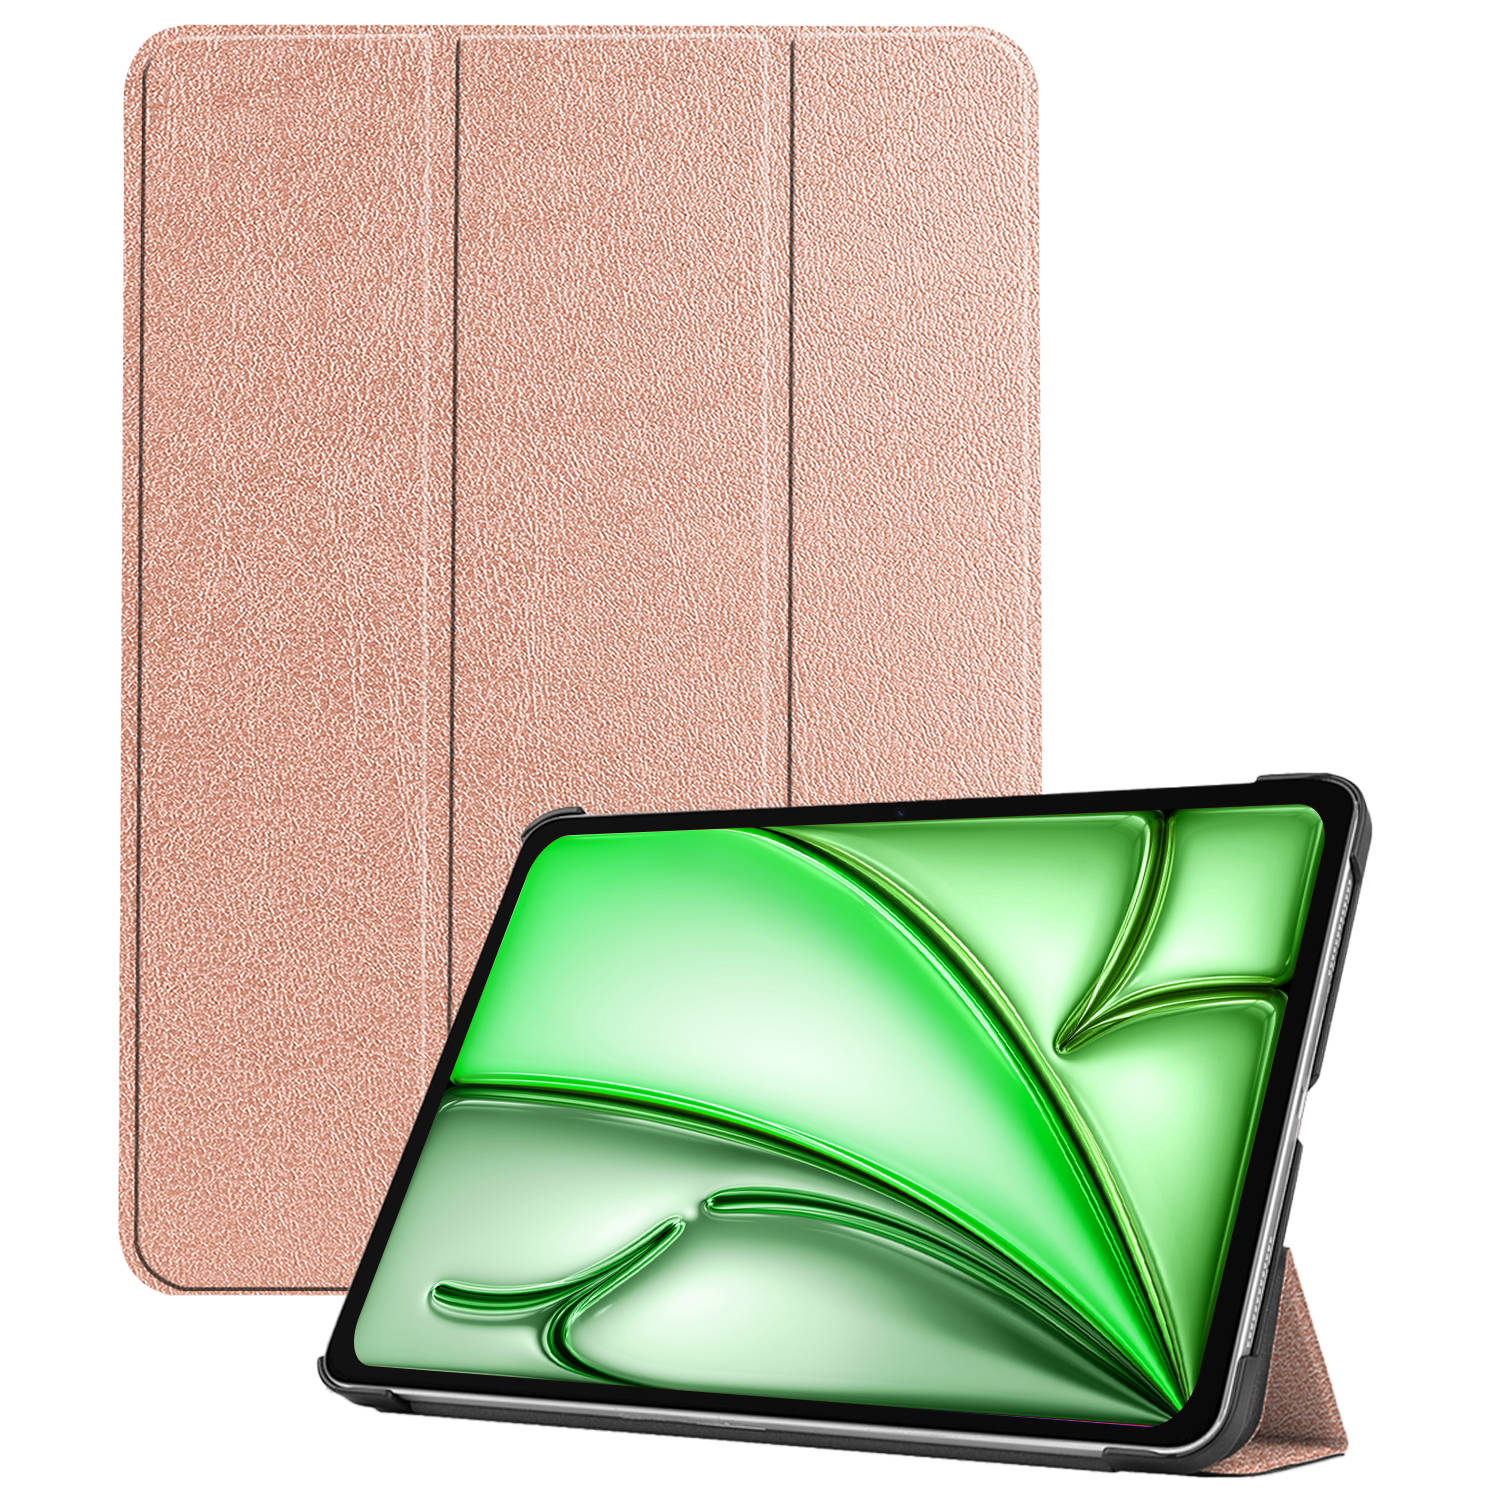 Hoesje Geschikt voor iPad Air 6 (11 inch) Hoes Case Tablet Hoesje Tri-fold - Hoes Geschikt voor iPad Air 2024 (11 inch) Hoesje Hard Cover Bookcase Hoes - Rosé goud